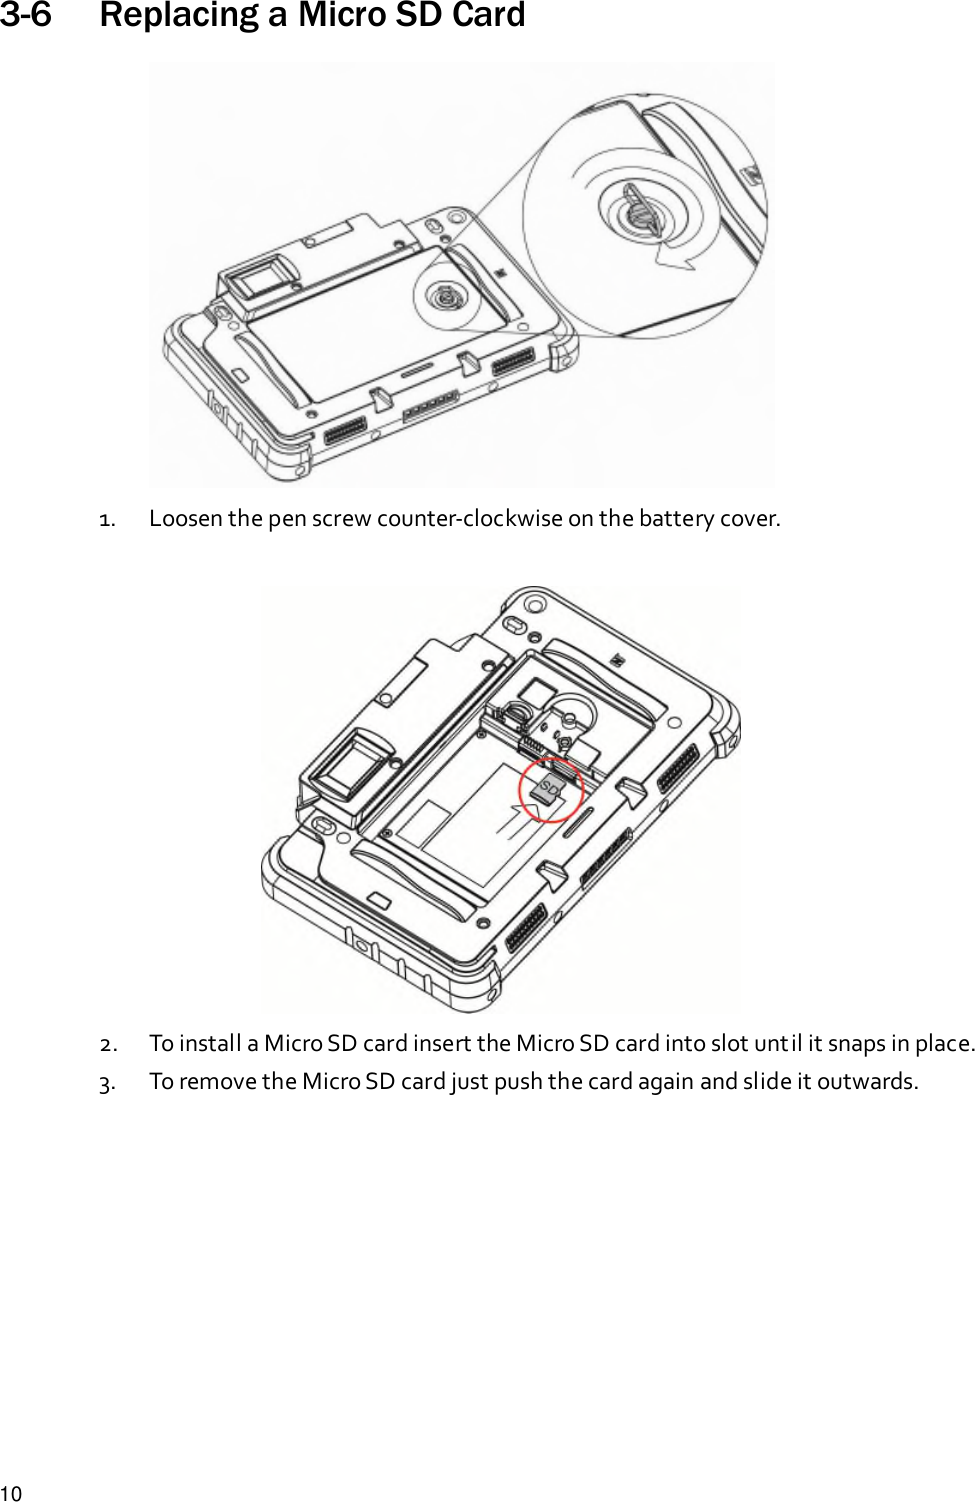 103-6 Replacing a Micro SD Card1. Loosen the pen screw counter-clockwise on the battery cover.2. To install a Micro SD card insert the Micro SD card into slot until it snaps in place.3. To remove the Micro SD card just push the card again and slide it outwards.